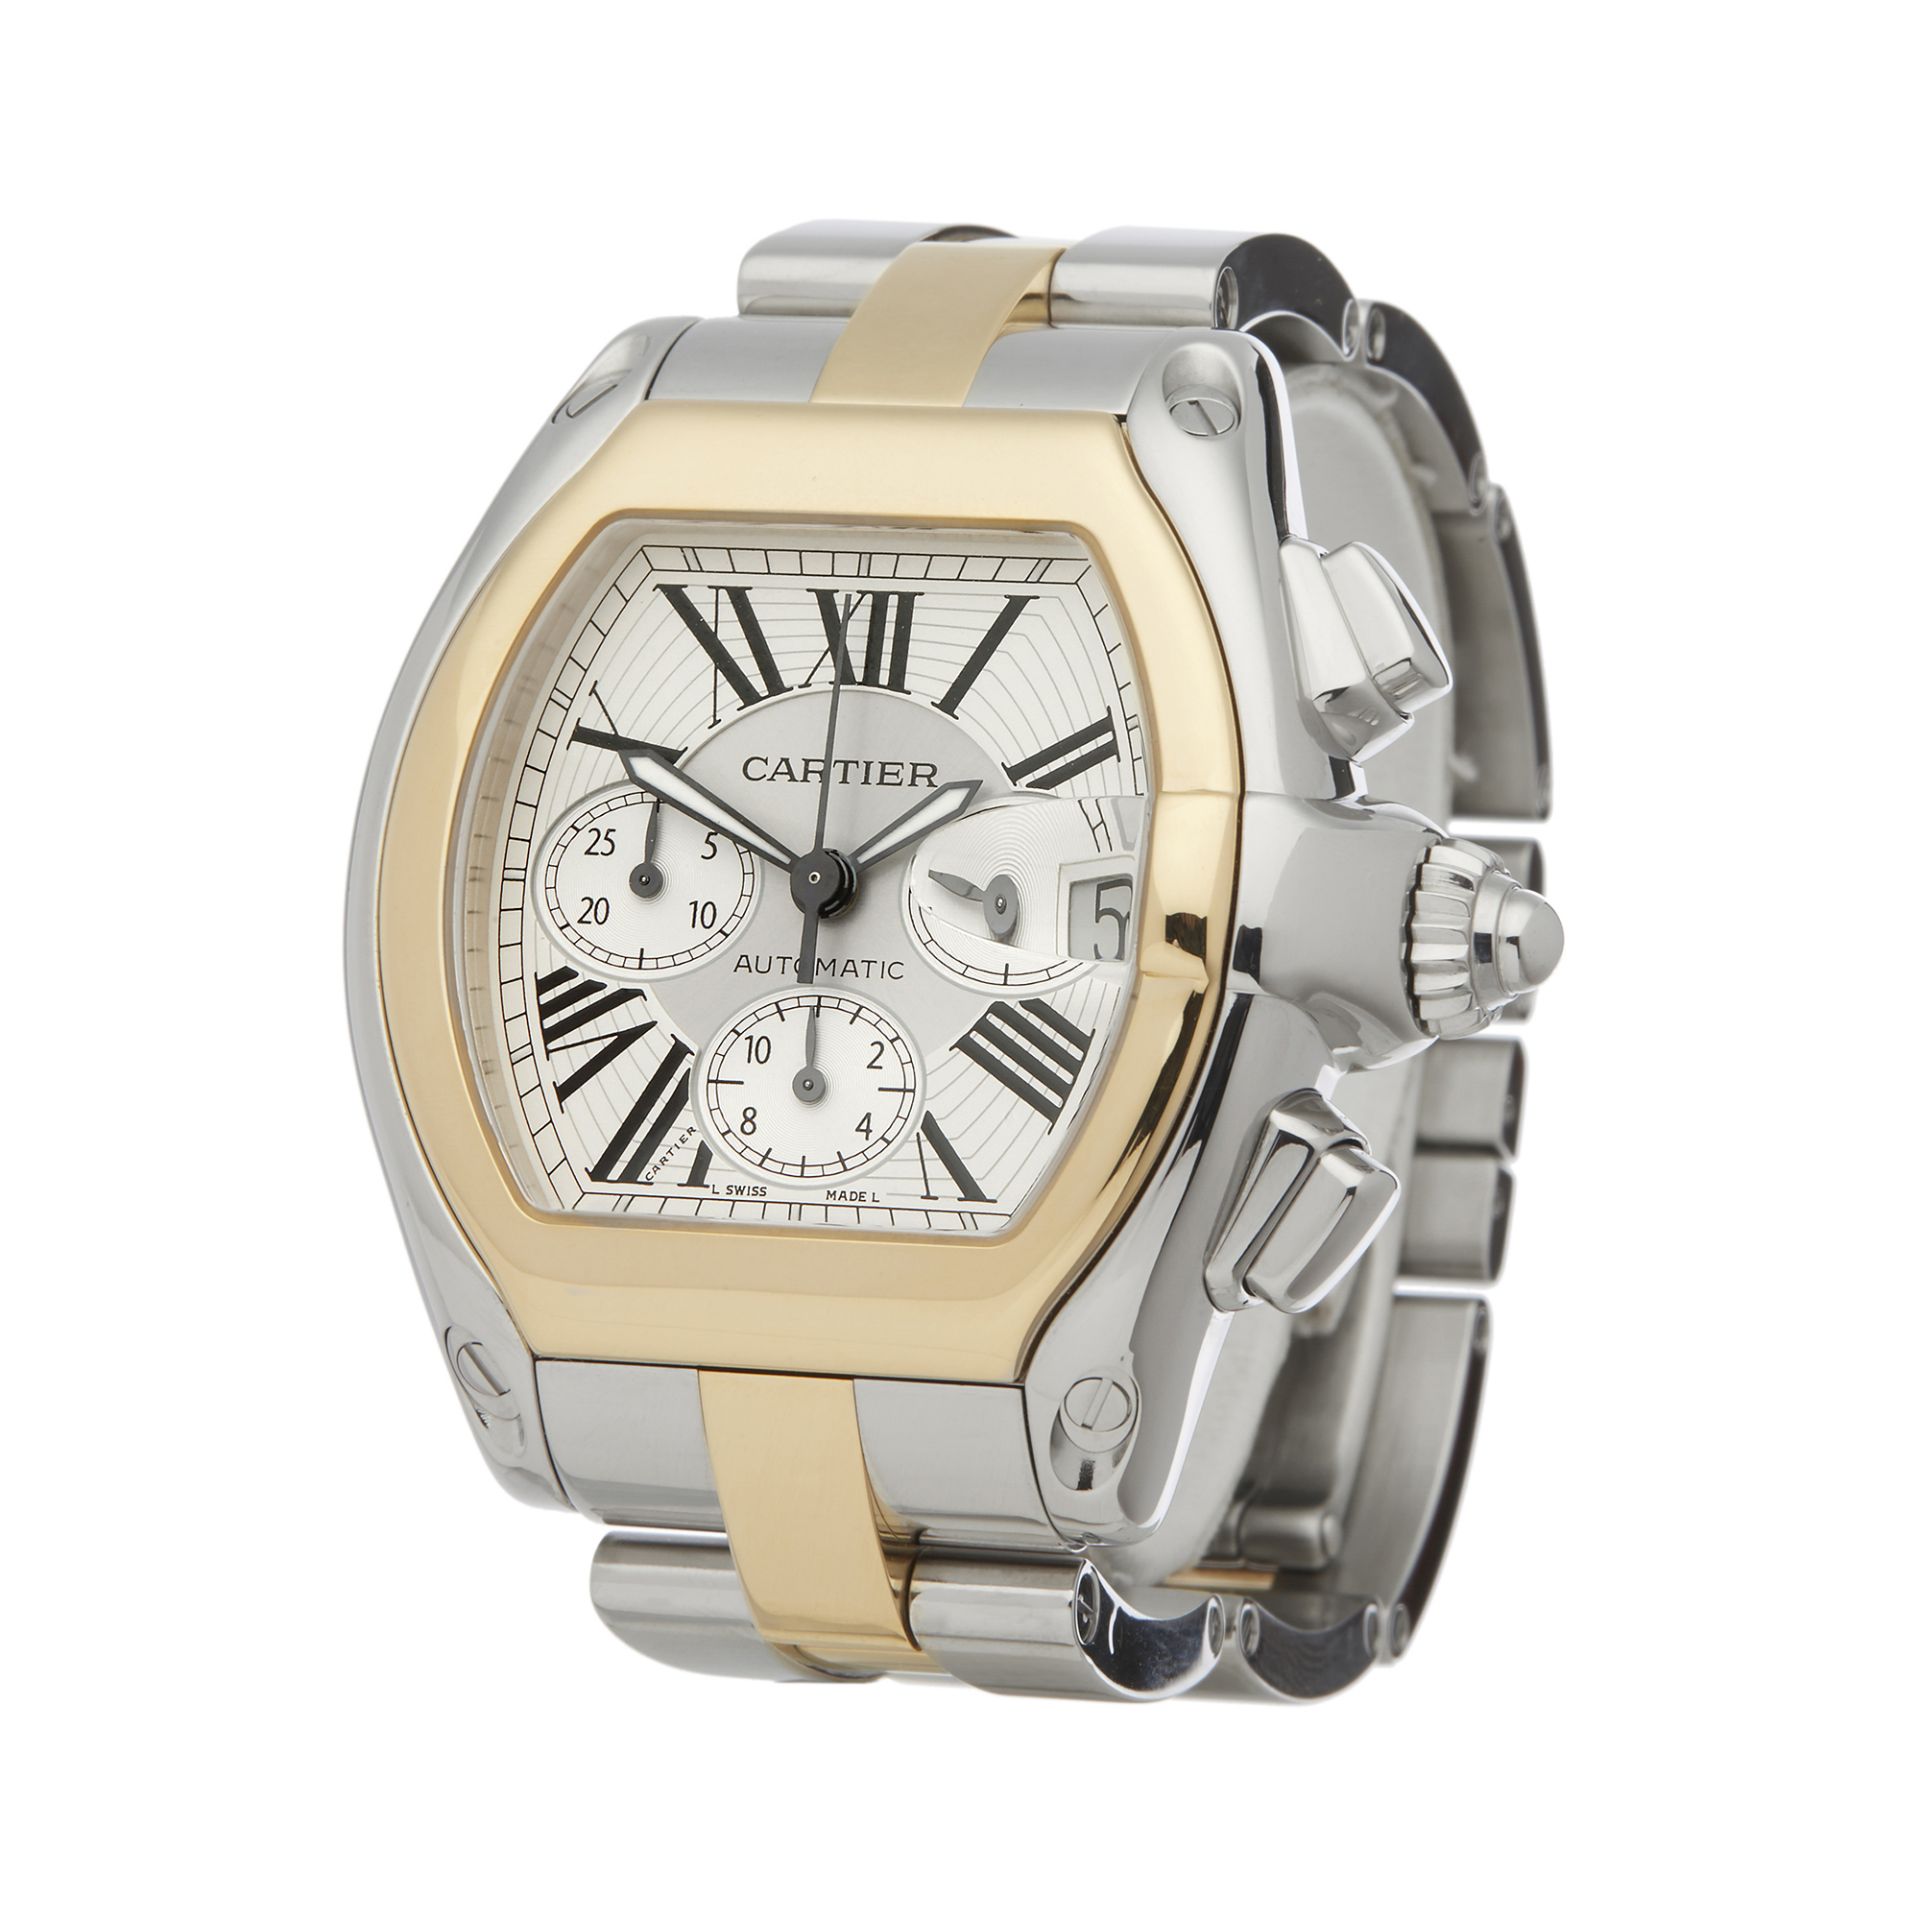 Cartier Roadster XL Chronograph Stainless Steel & Yellow Gold - 2618 - Image 7 of 7